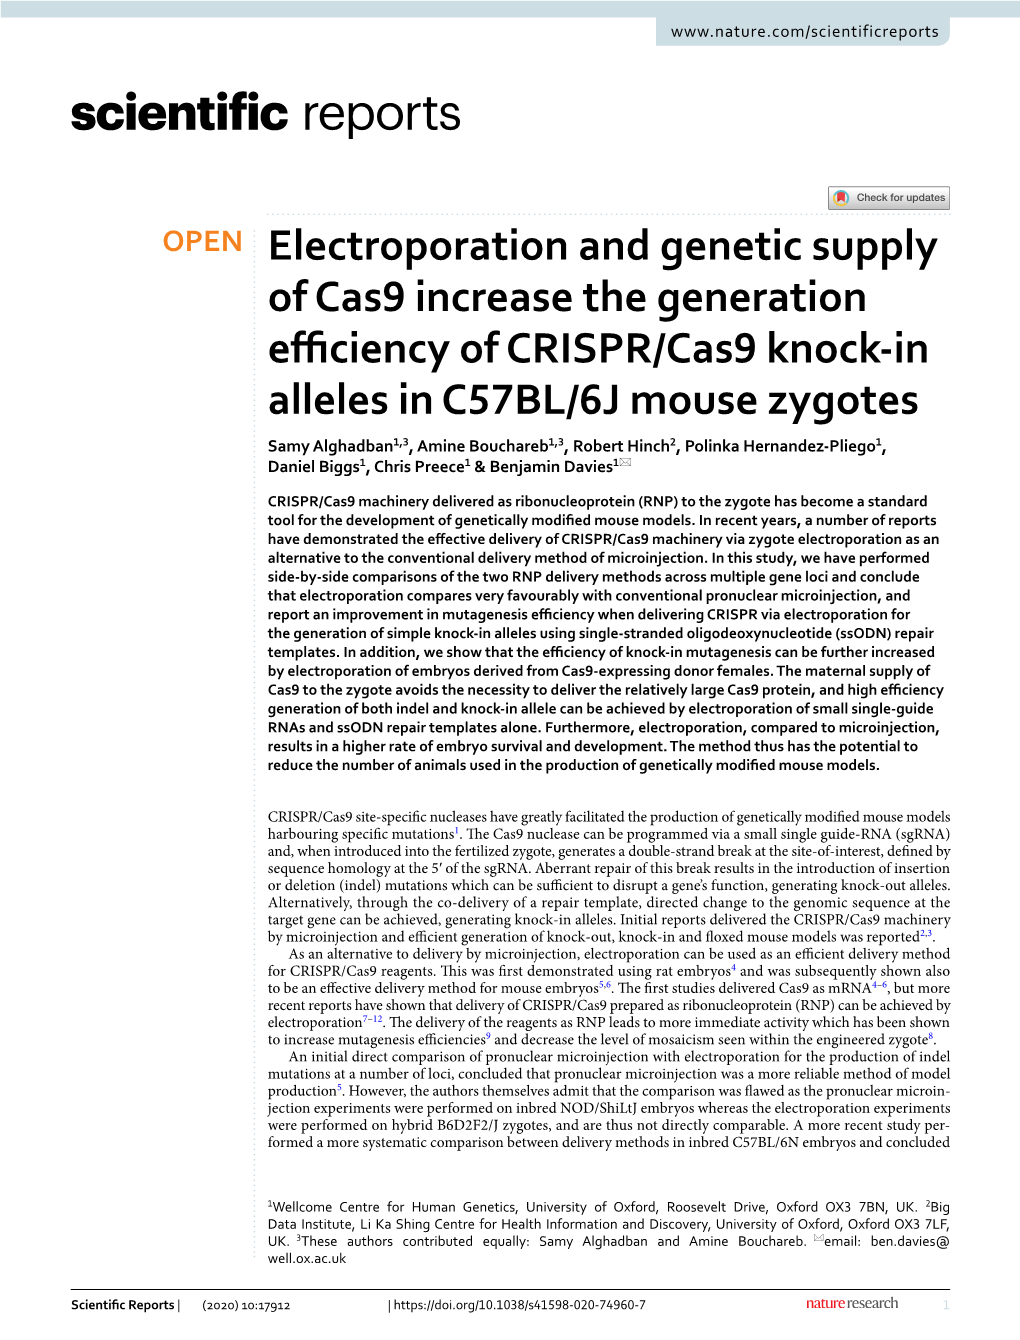 Electroporation and Genetic Supply of Cas9 Increase the Generation